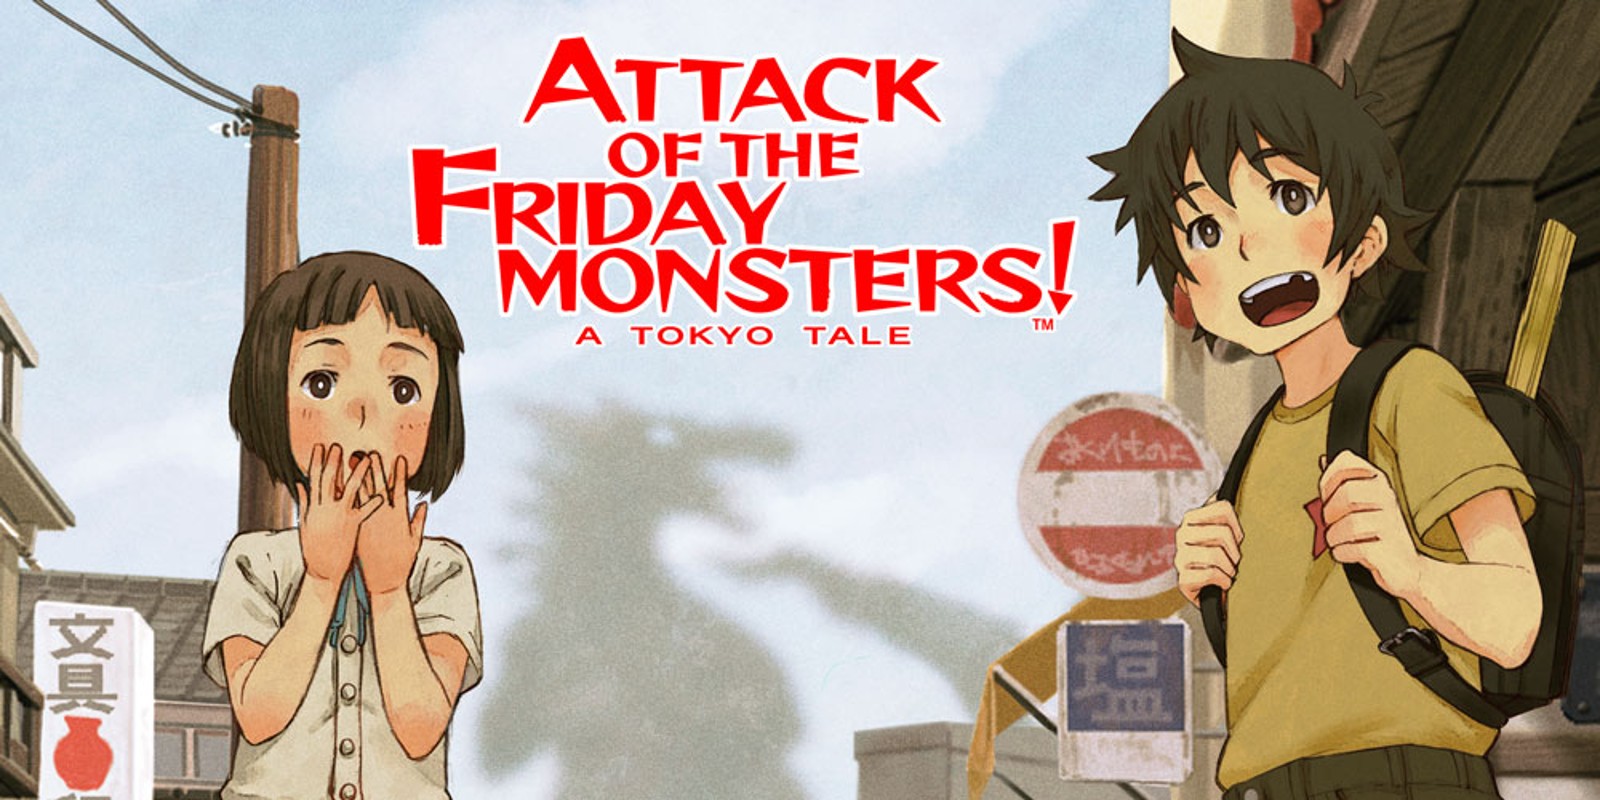 ATTACK OF THE FRIDAY MONSTERS! A TOKYO TALE™